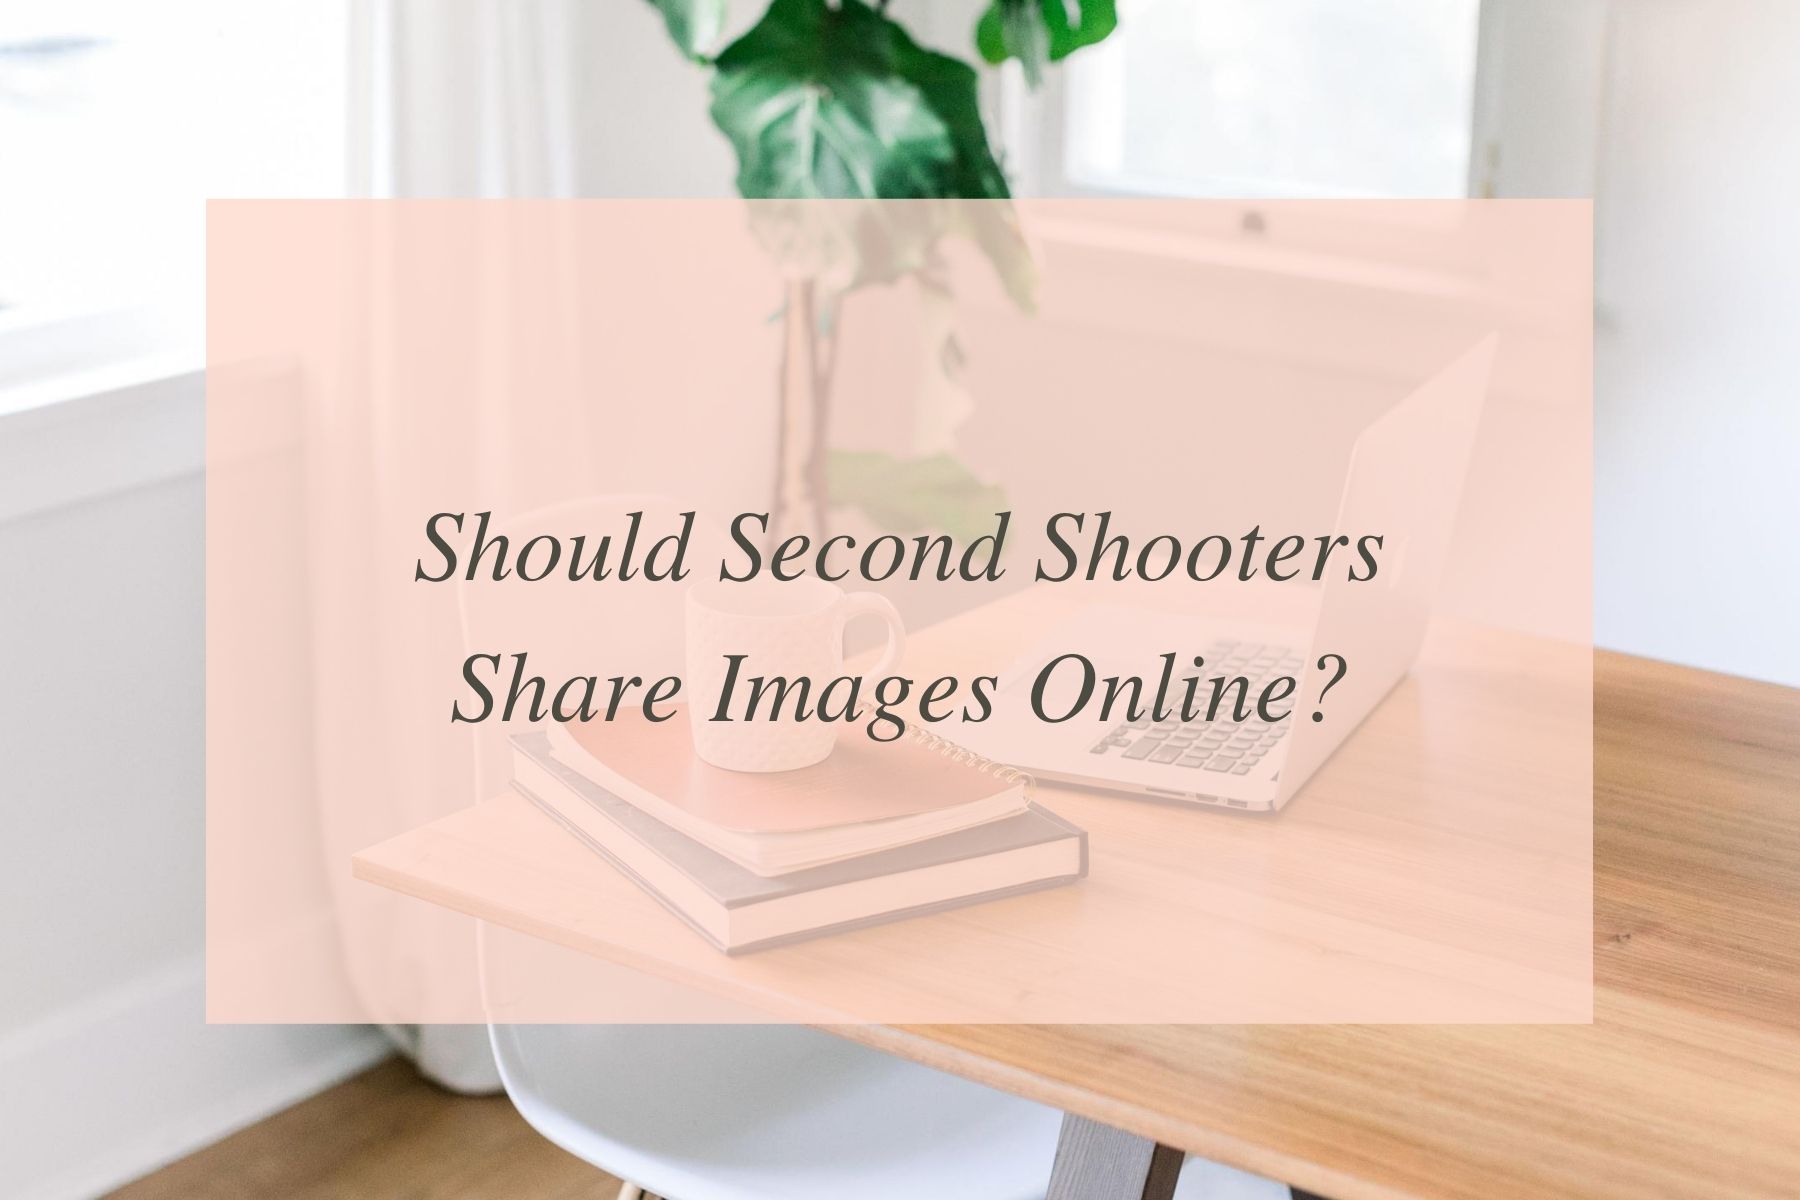 should second shooters share images online?